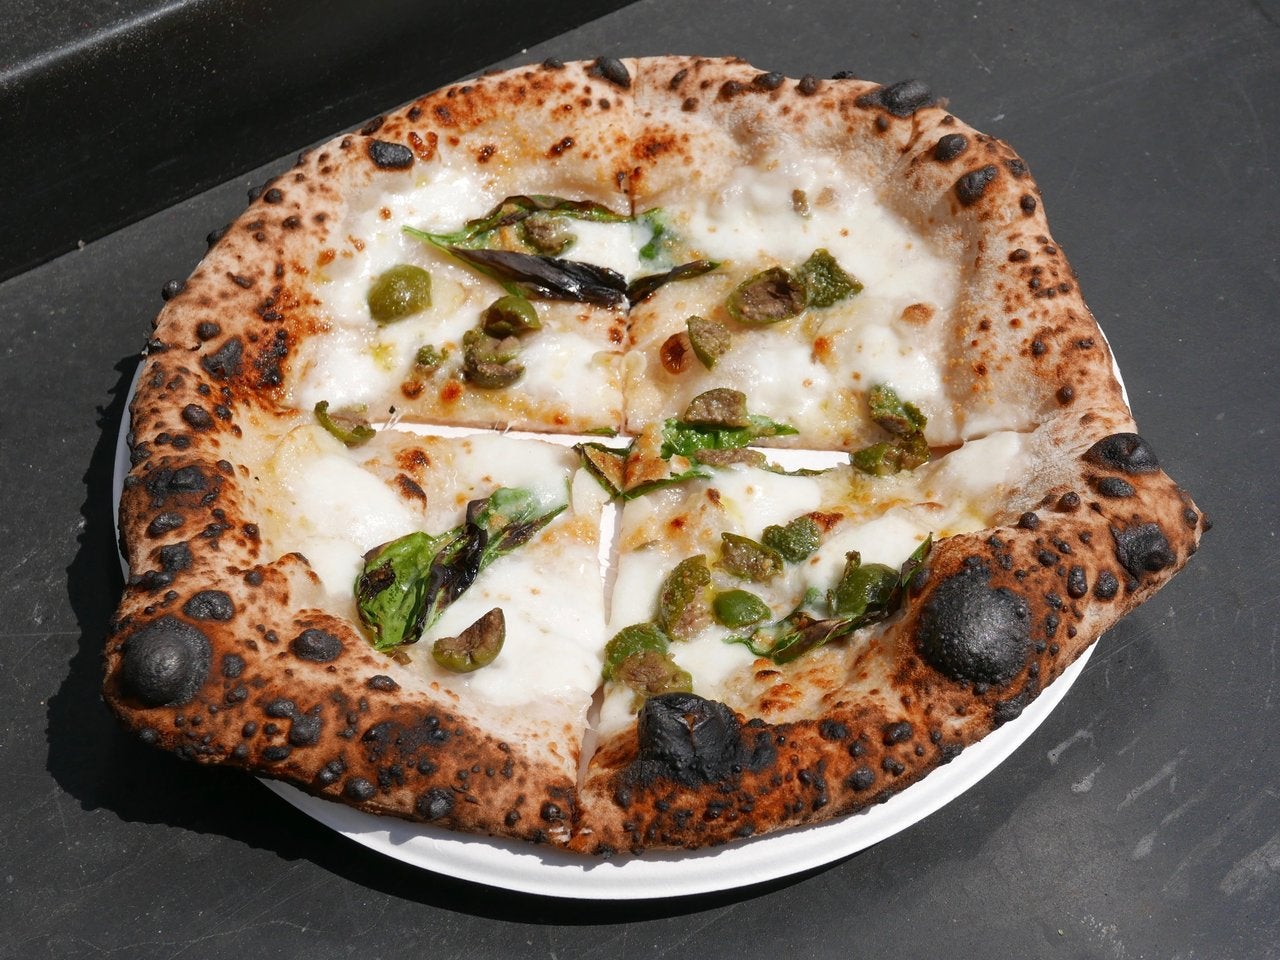 Bianca Pizza at Vivace Pizzeria Truck